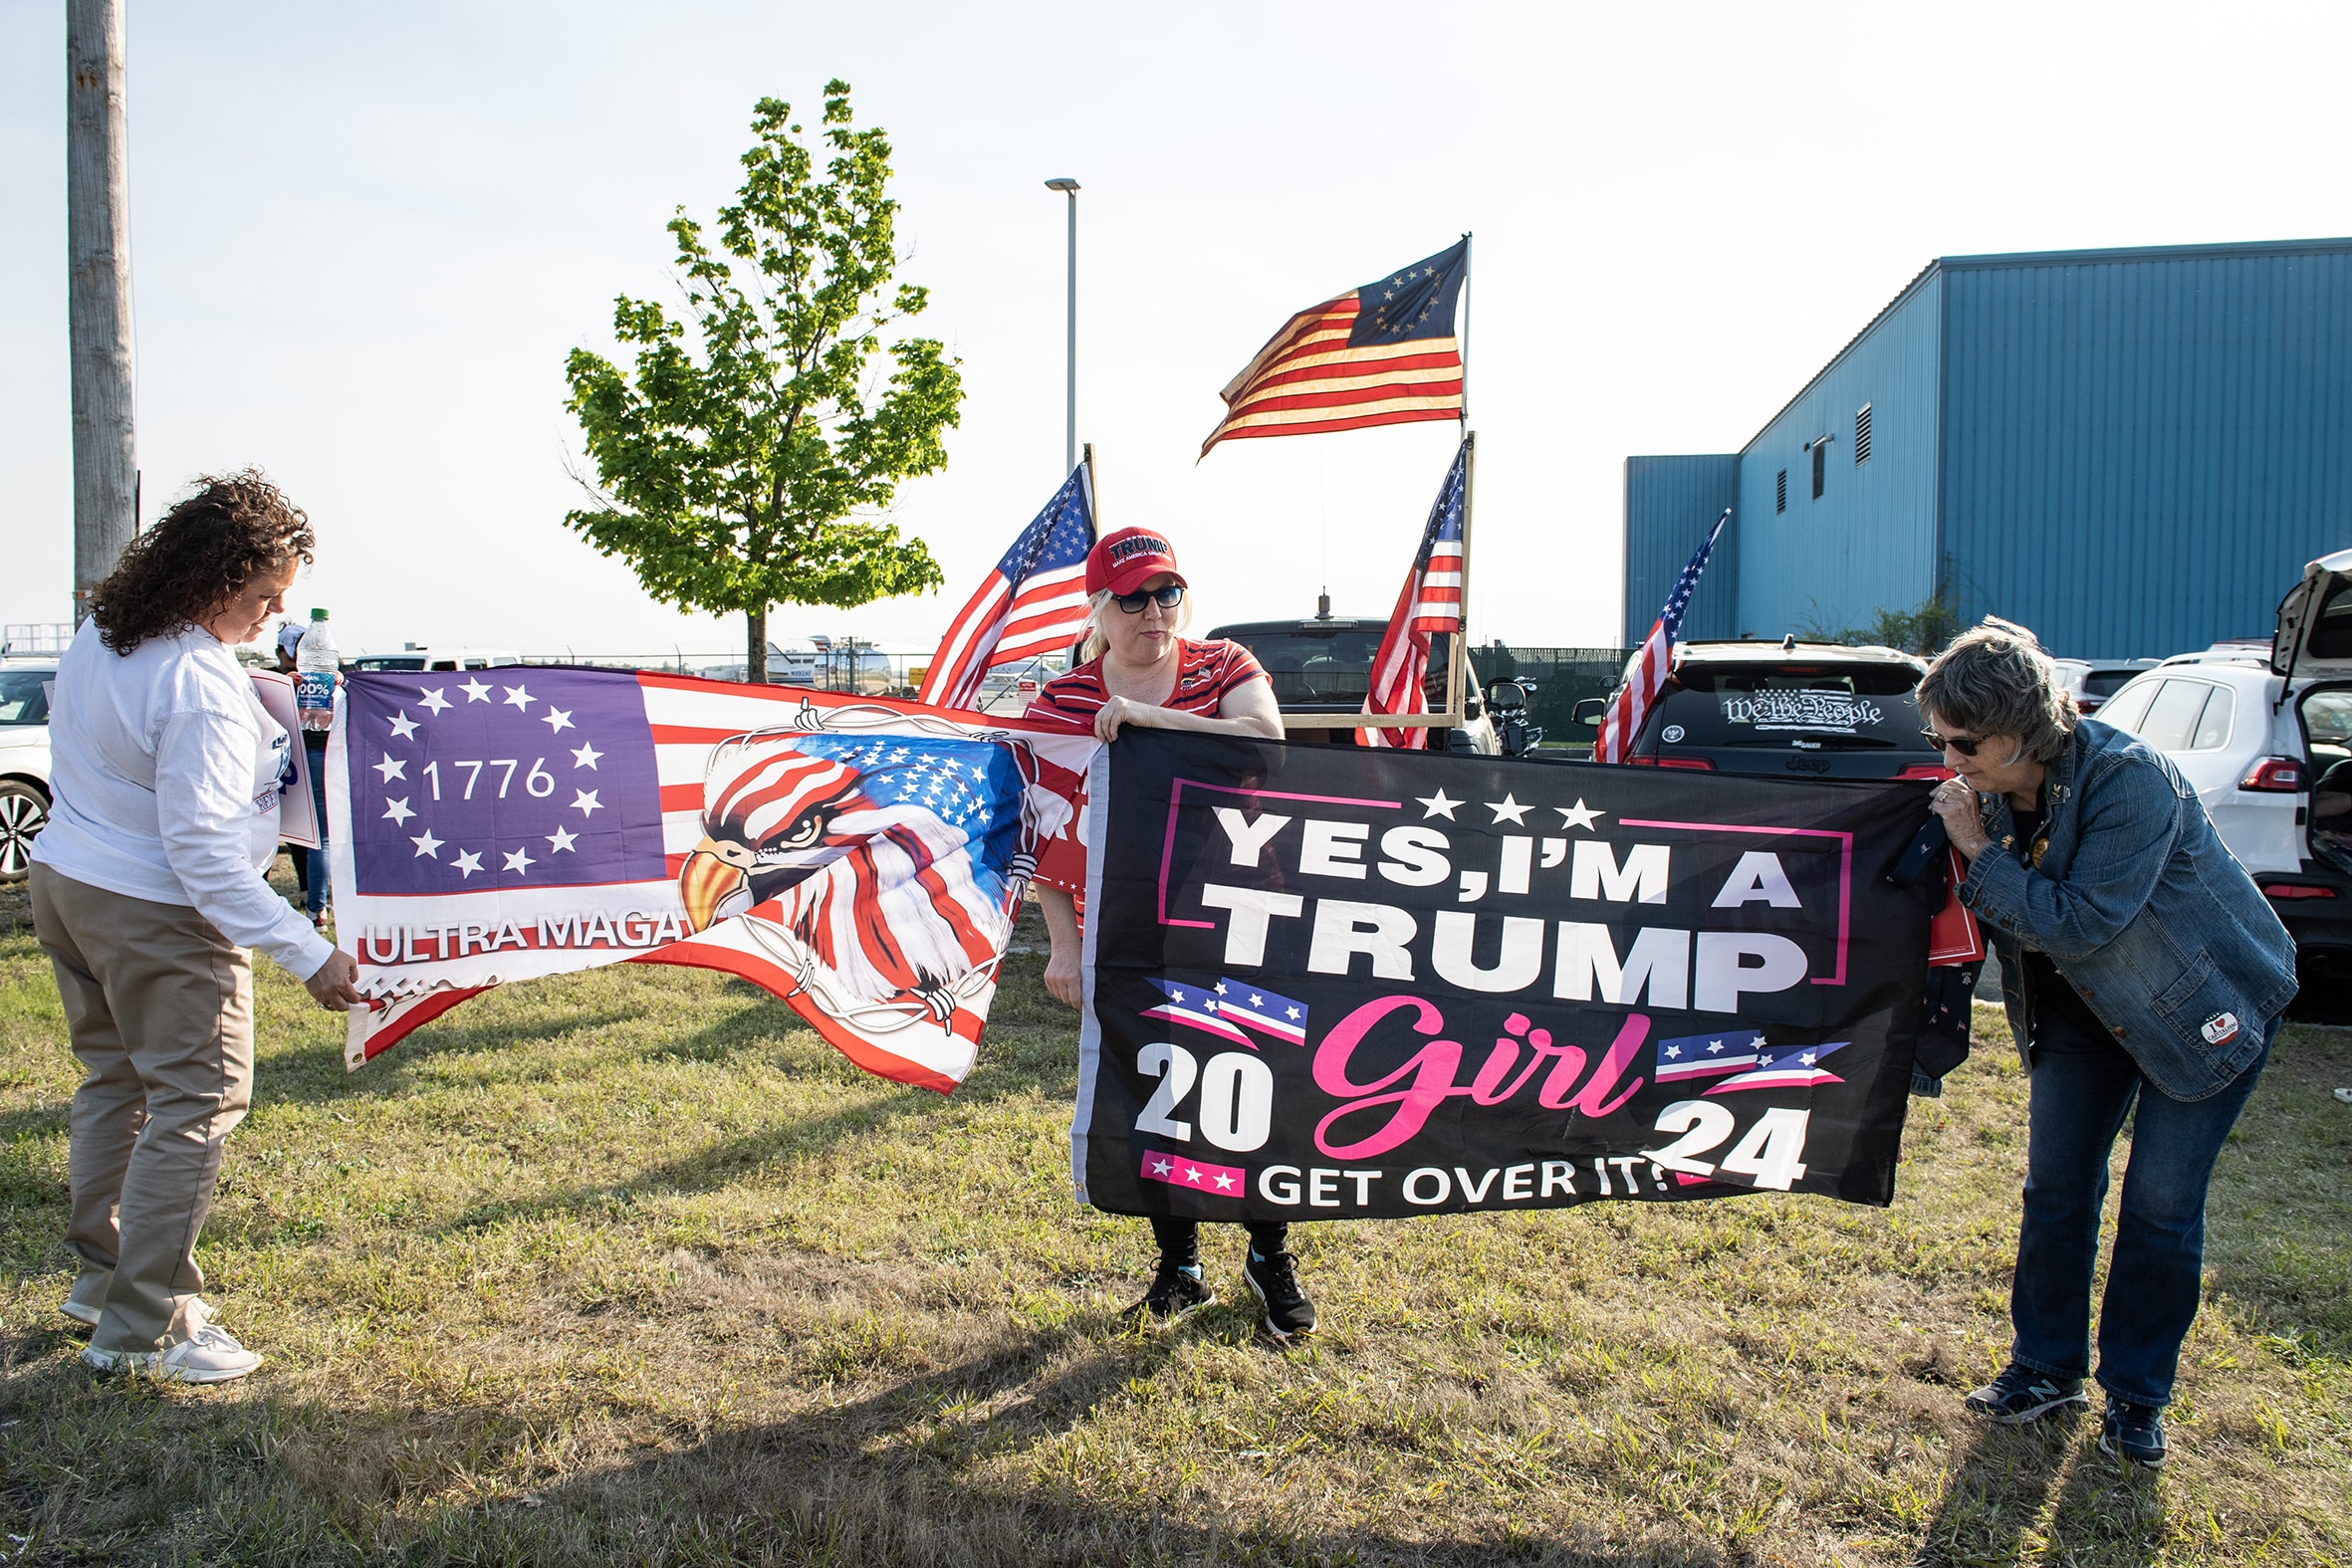 MANCHESTER: Supporters of former US President and 2024 Presidential hopeful Donald Trump rally to welcome him at Manchester airport in Manchester, New Hampshire, on May 10, 2023 ahead of his CNN town hall meeting. – AFP